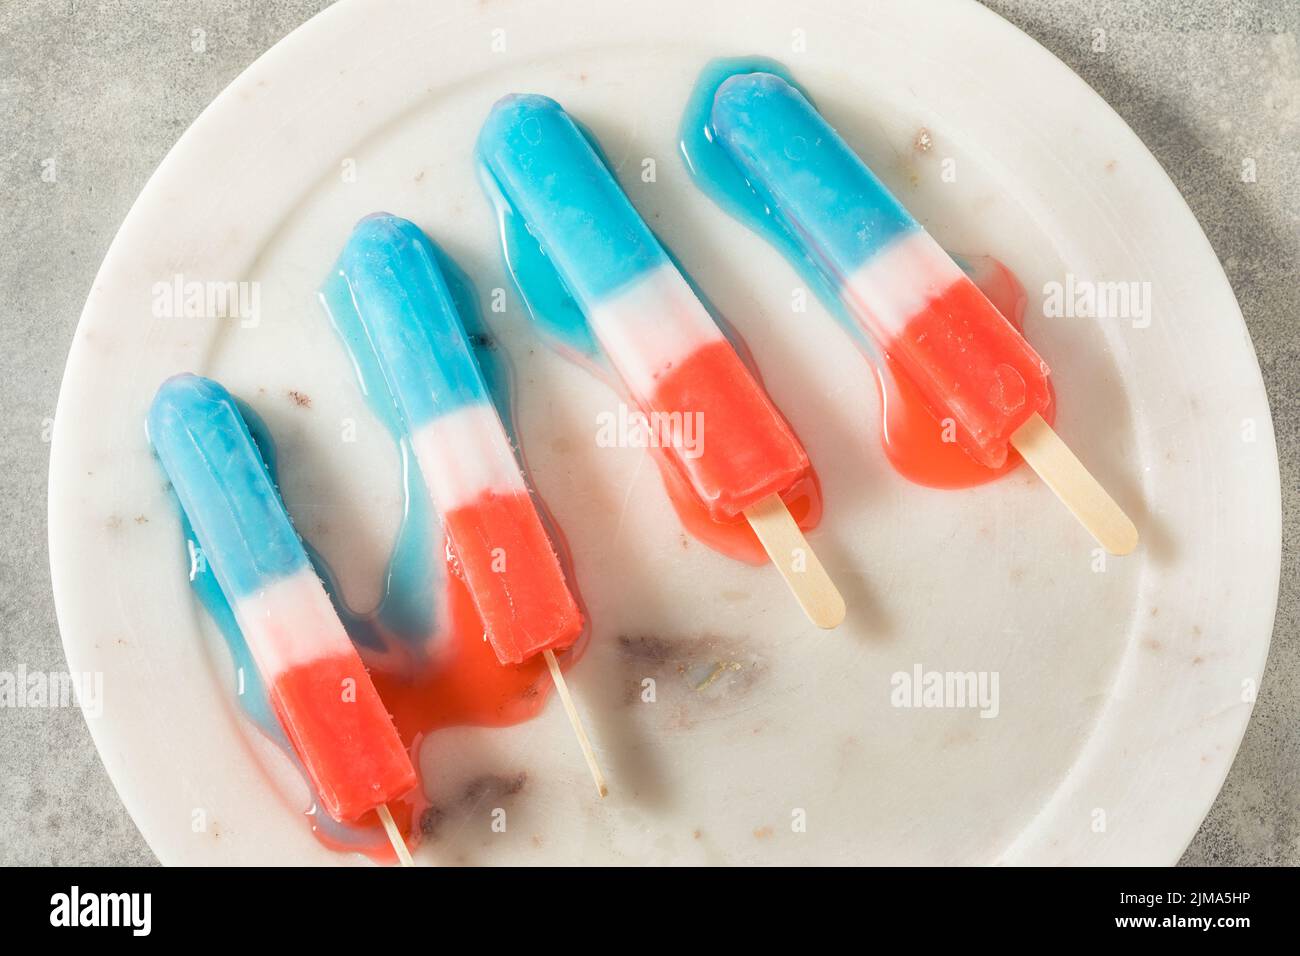 Homemade Red White Blue Popsicle Ready to Eat for the Summer Stock Photo